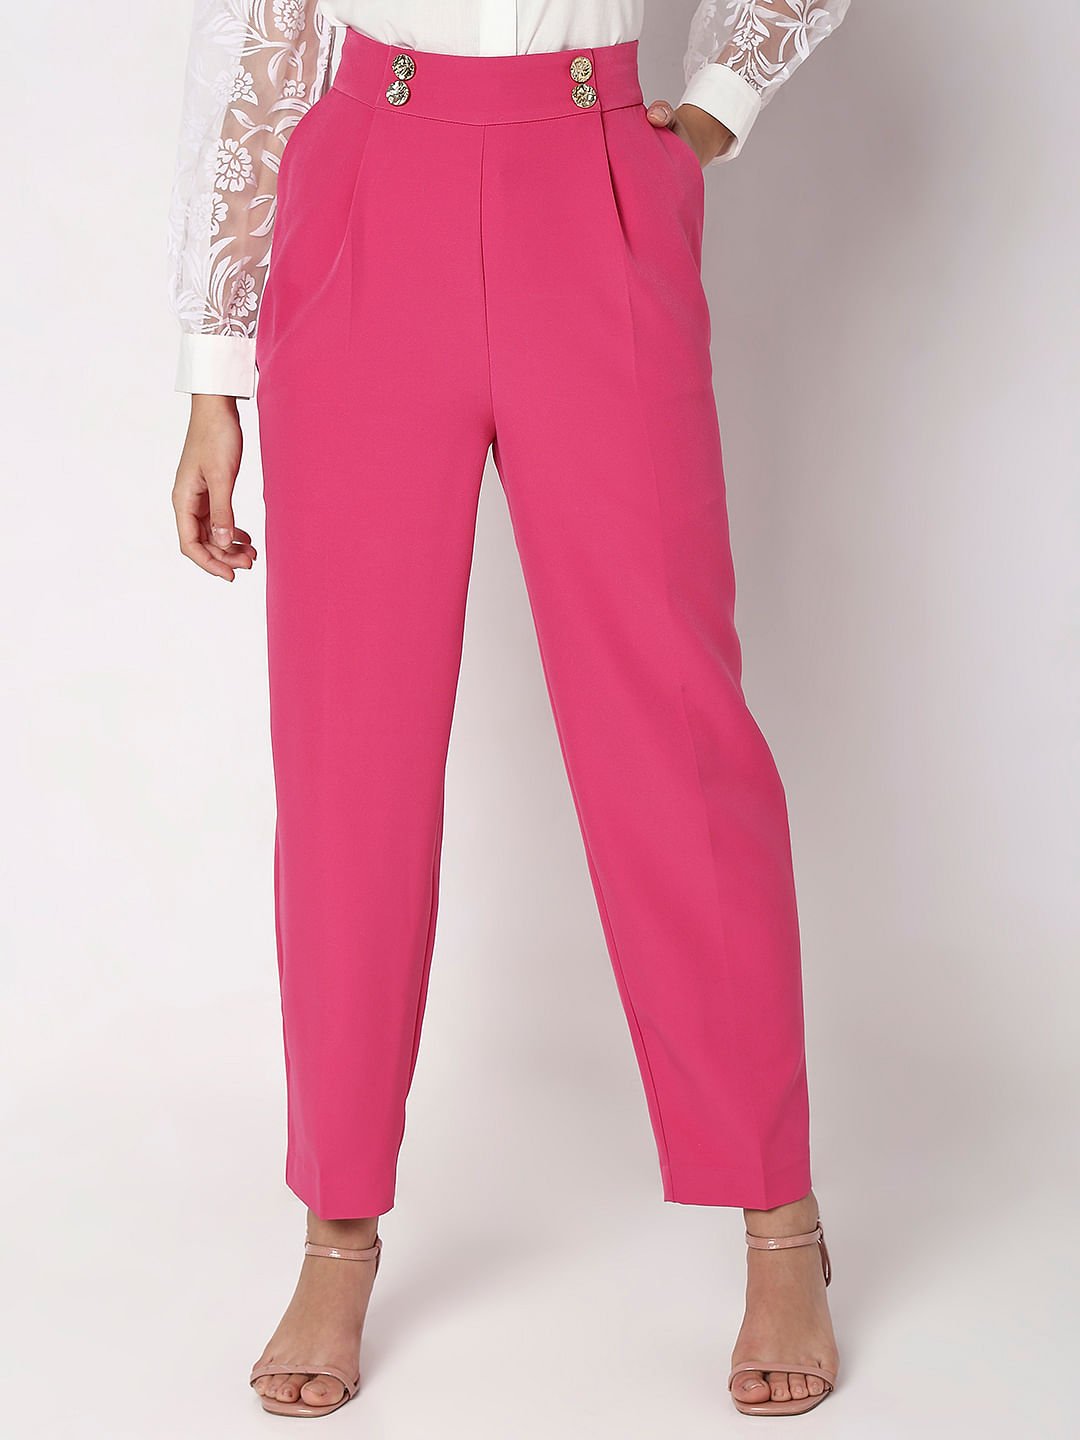 AND Trousers and Pants  Buy AND Pink Formal Pants with Belt OnlineNykaa  Fashion